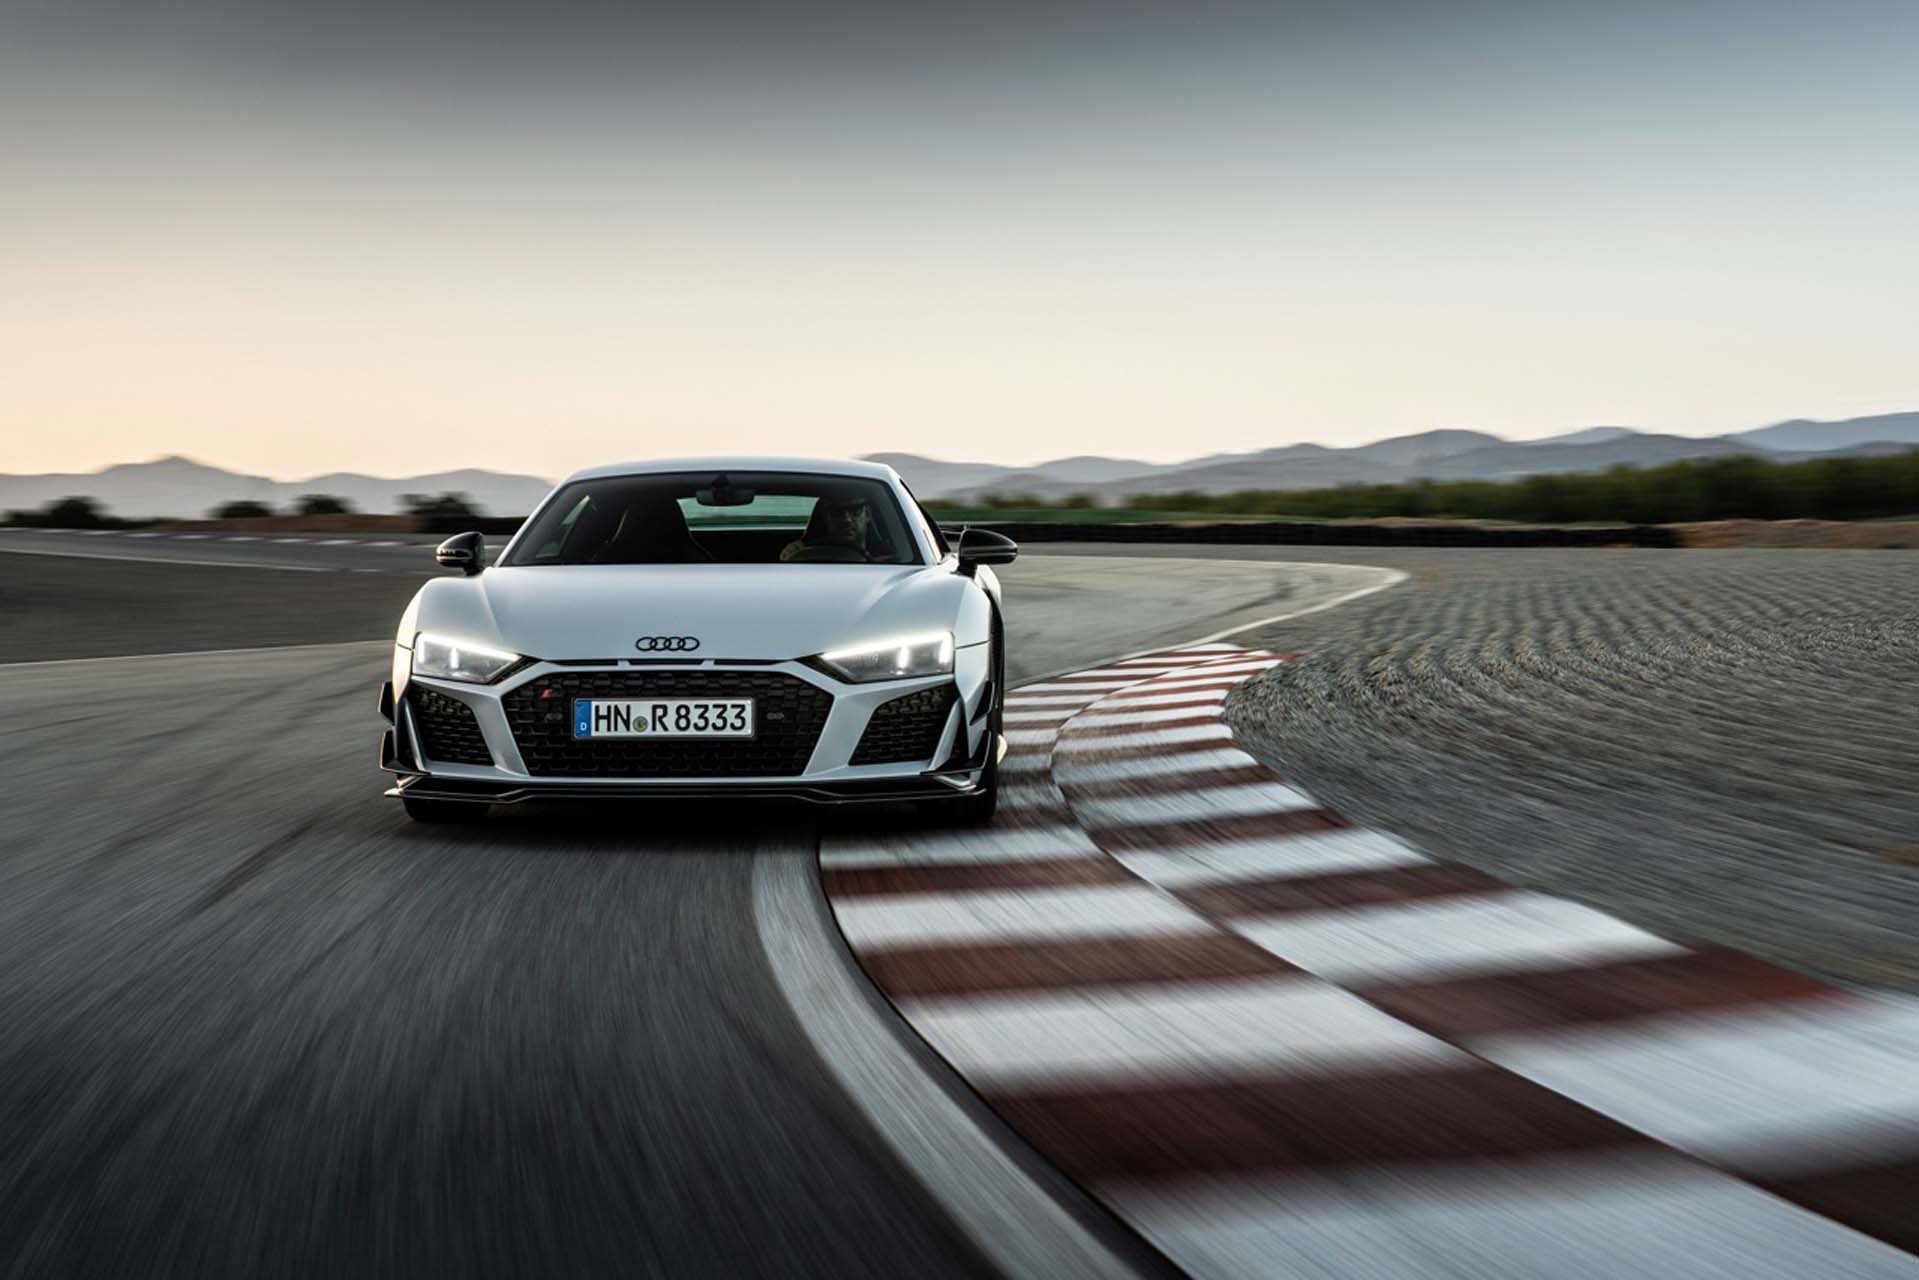 Audi R8 V10 GT costs $ limited to 150 units